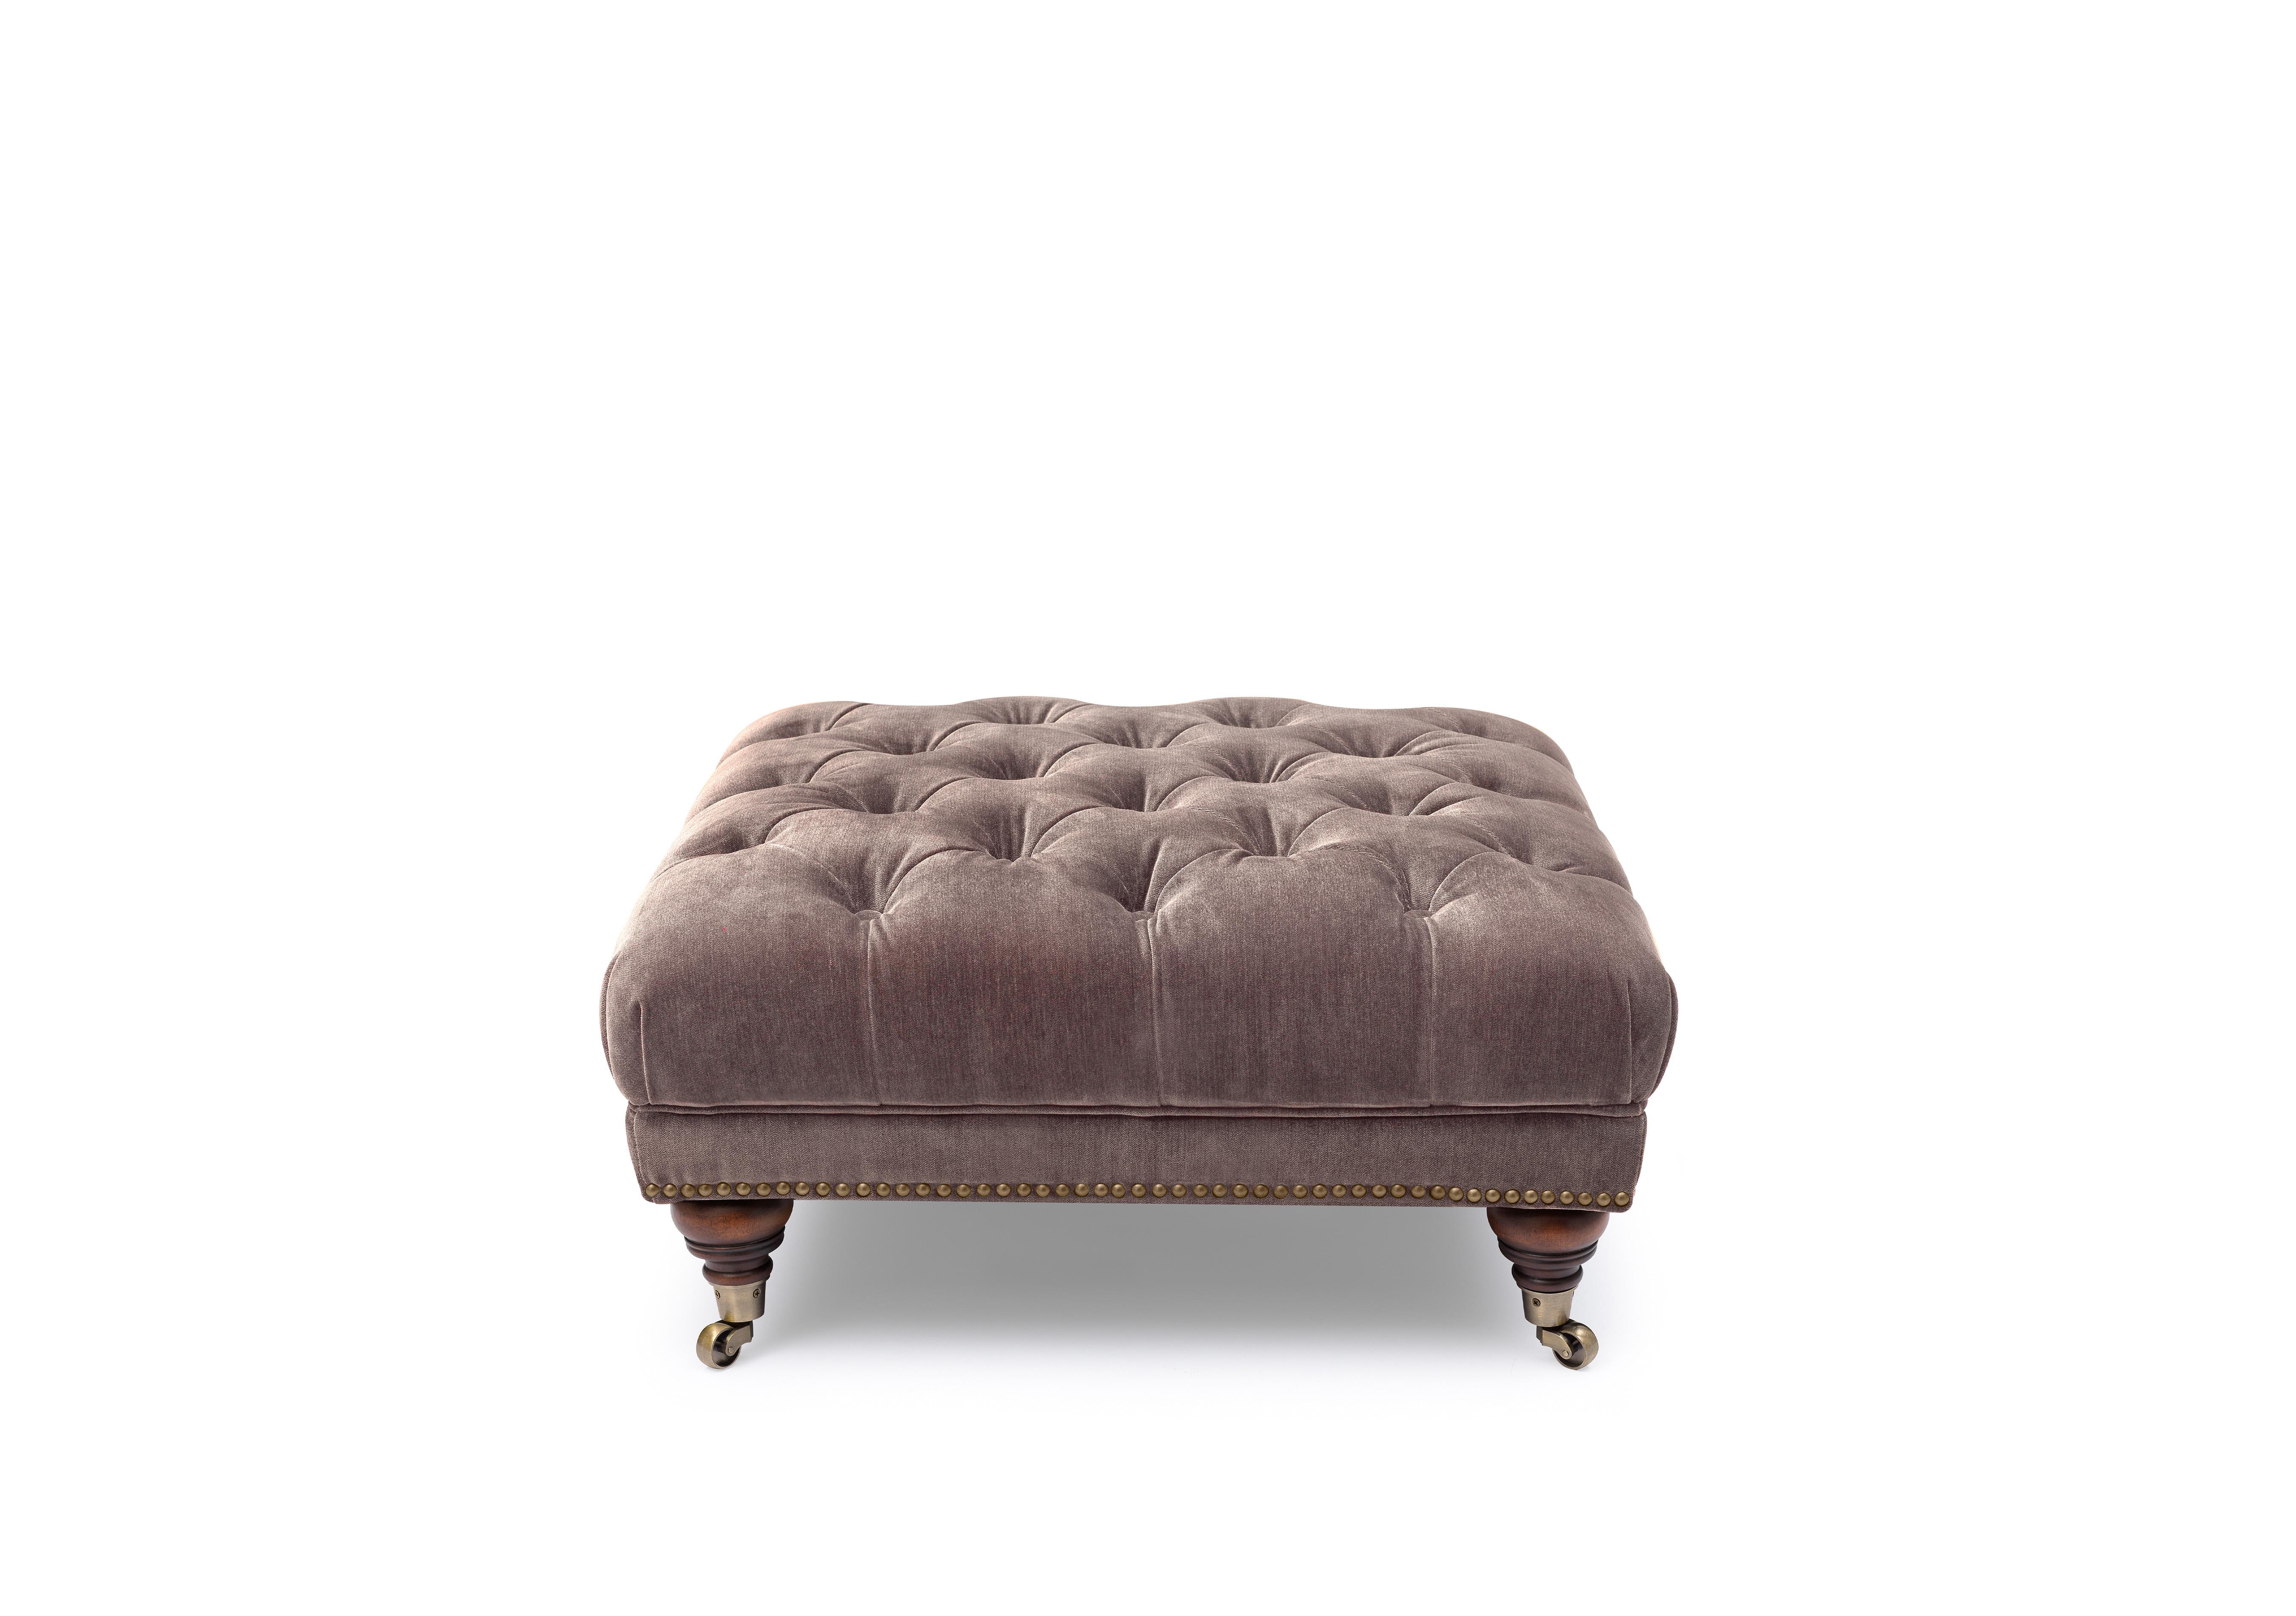 Shackleton Fabric Square Footstool with Castors in X3y1-W023 Antler on Furniture Village